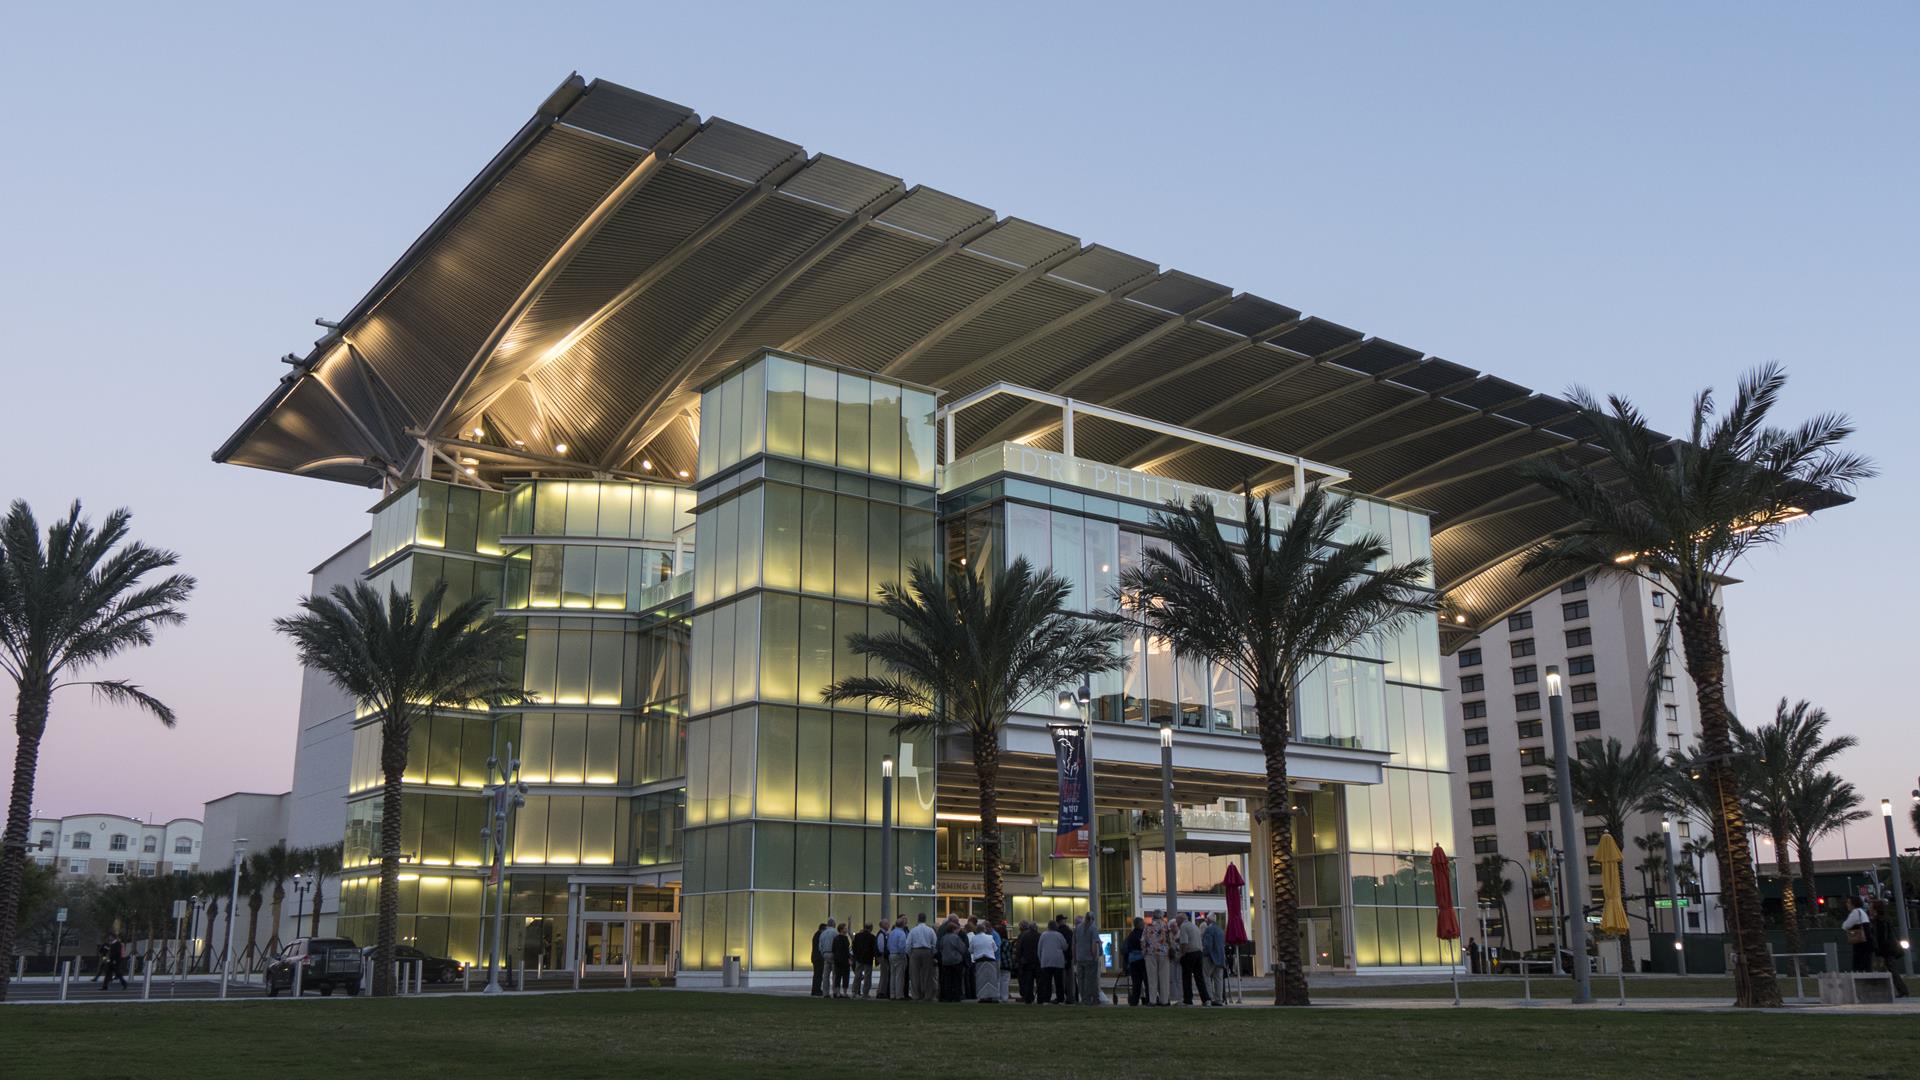 Top 5 Performance Venues for Students in Orlando for 2019